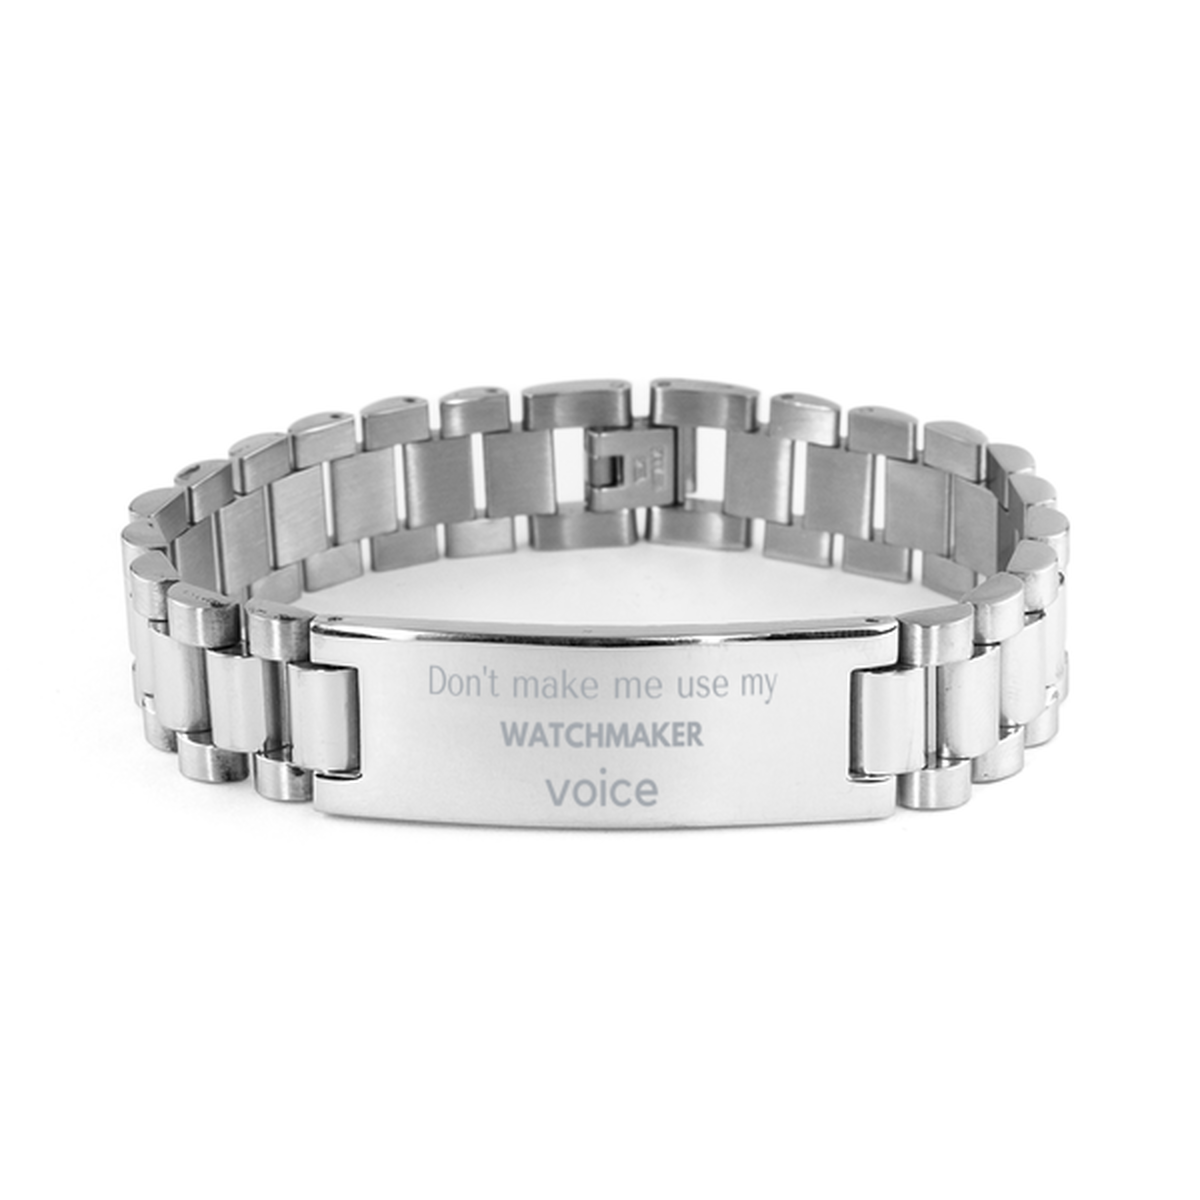 Don't make me use my Watchmaker voice, Sarcasm Watchmaker Gifts, Christmas Watchmaker Ladder Stainless Steel Bracelet Birthday Unique Gifts For Watchmaker Coworkers, Men, Women, Colleague, Friends